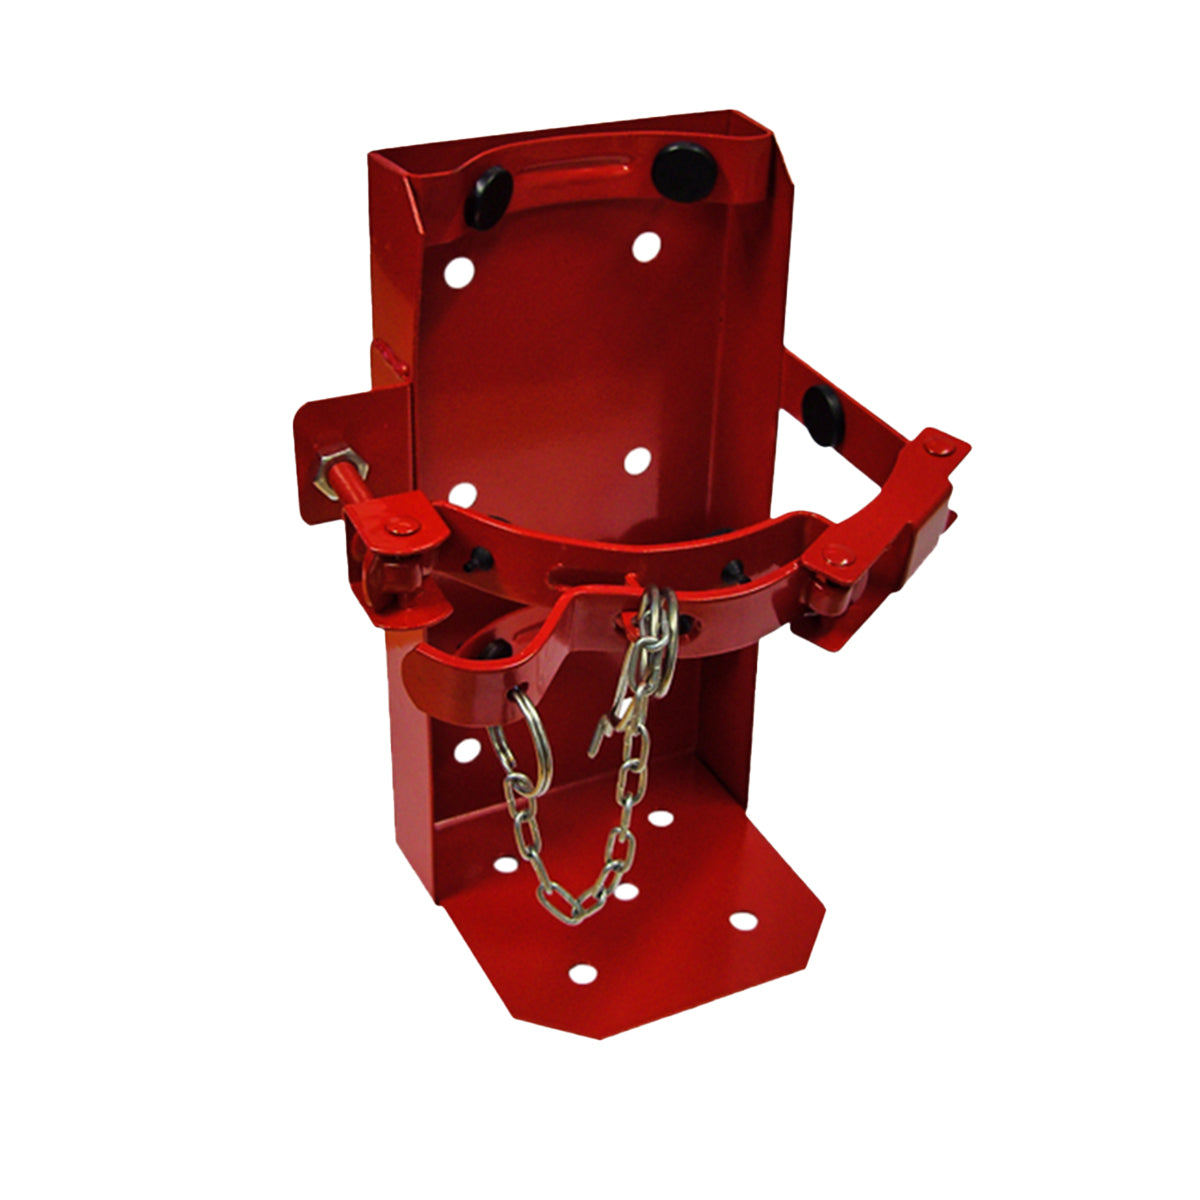 Powder coated red vehicle bracket suits most 2.5kg-4.5kg DCP - Premium Heavy Duty Vehicle Brackets from Firebox - Shop now at Firebox Australia